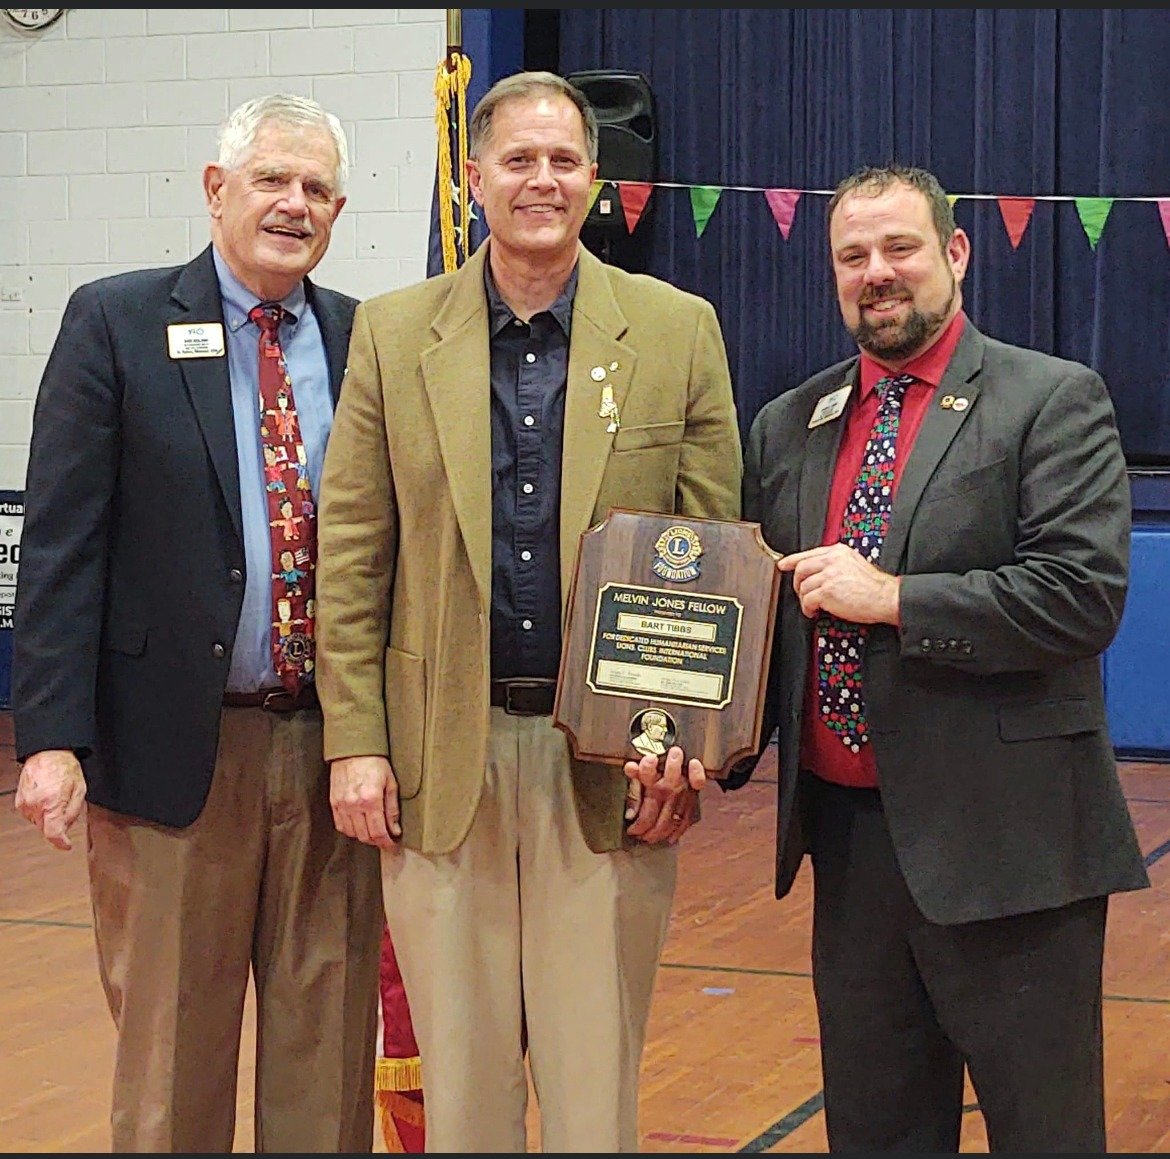 Bart Tibbs is presented with the Melvin Jones Fellow award, the highest honor of the evening. Pictured left to right: Past International Lions Club Director Donald Noland, Bart Tibbs and current International Director Justin Faber.